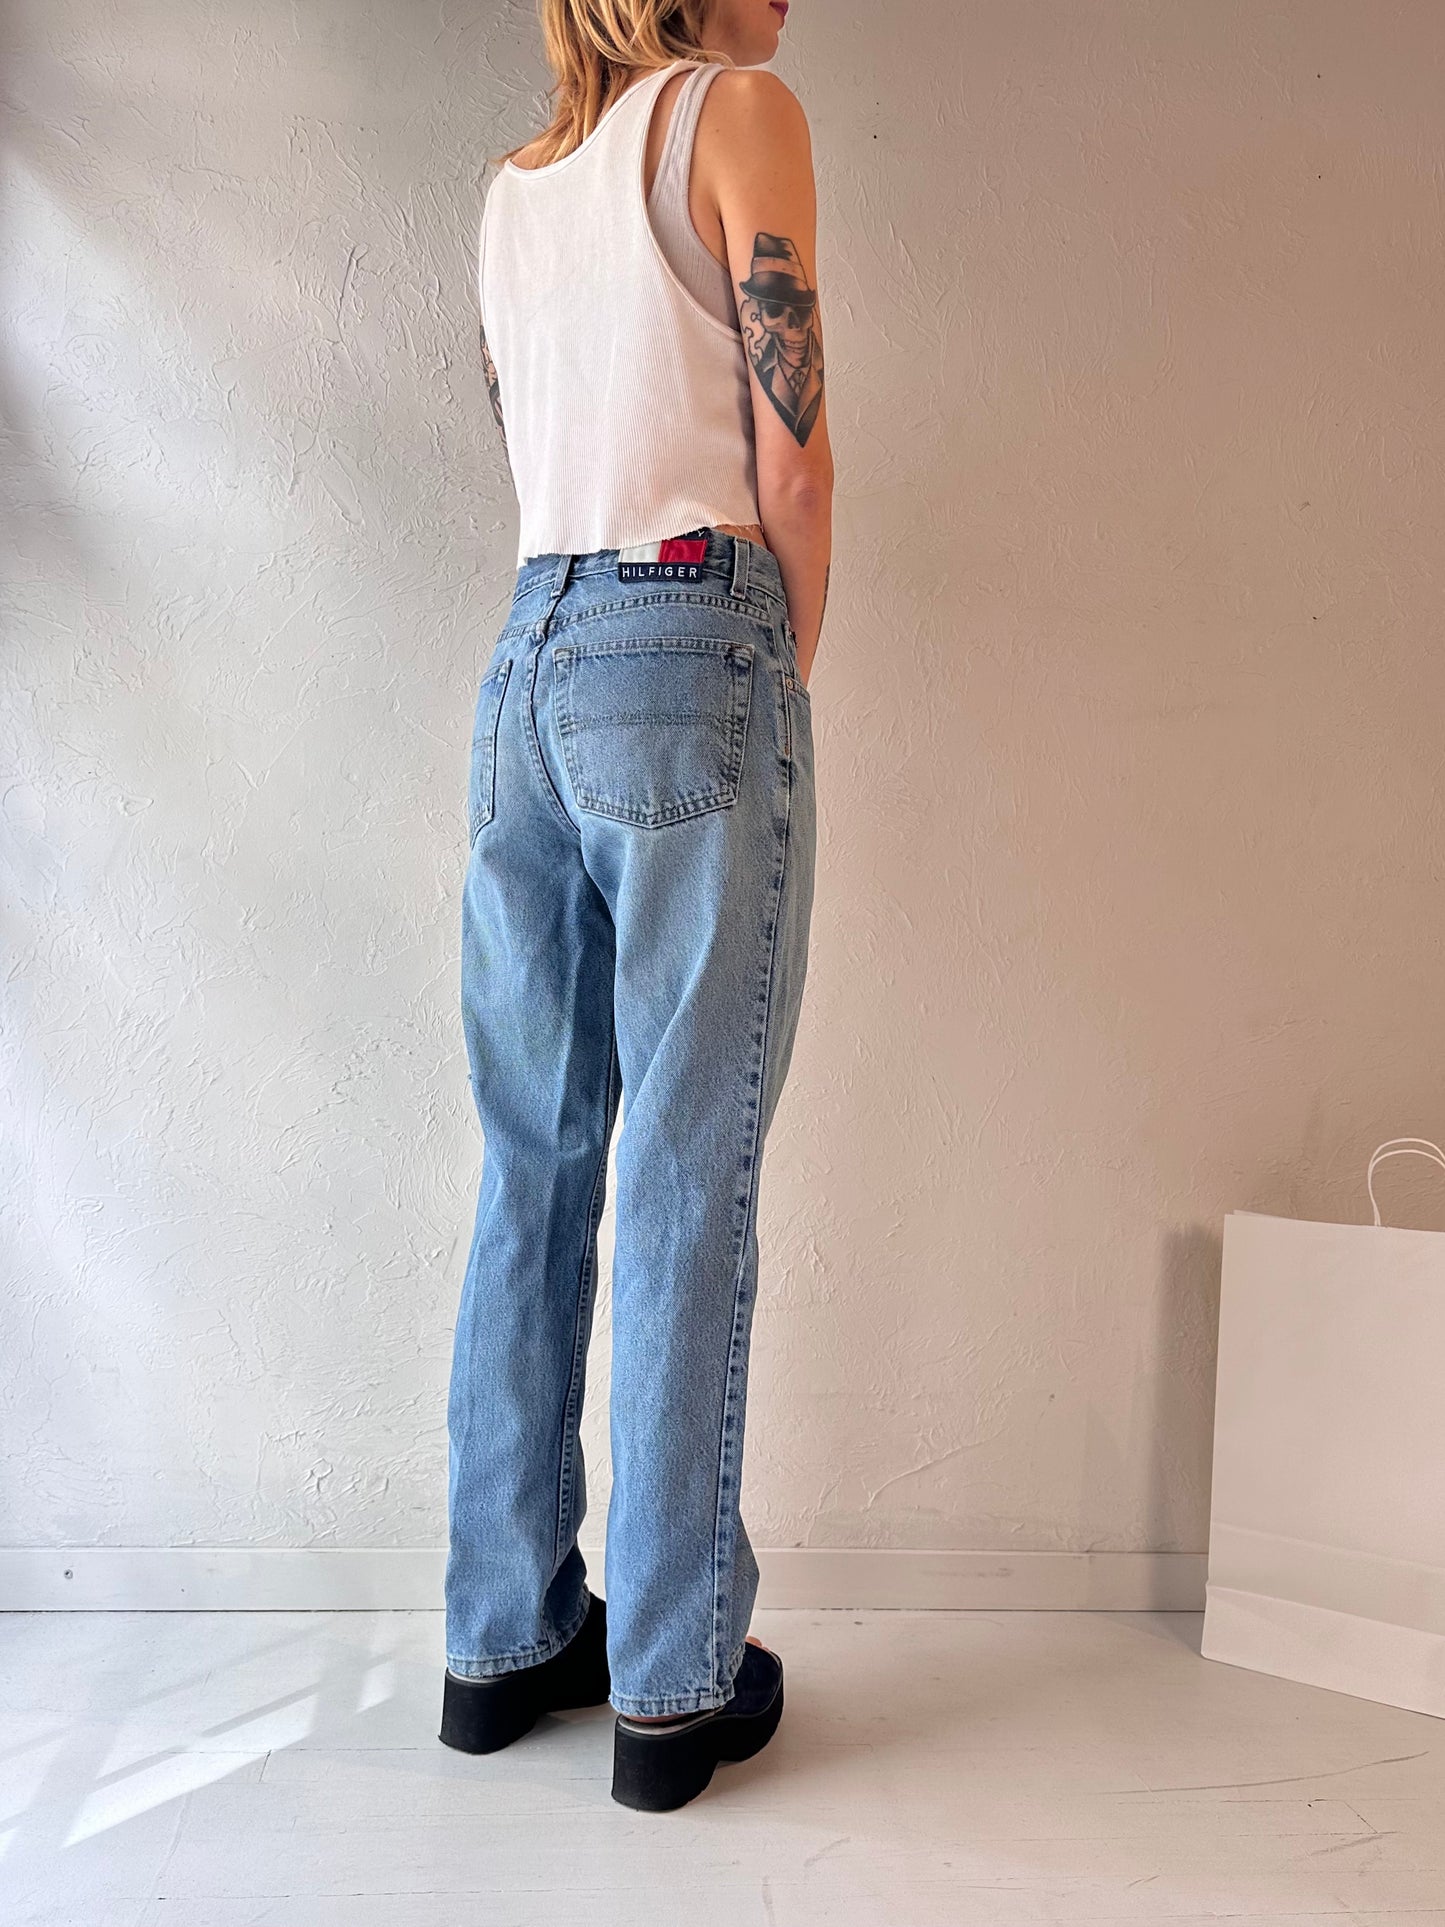 90s 'Tommy Hilfiger' Jeans / Made in Canada / 28"